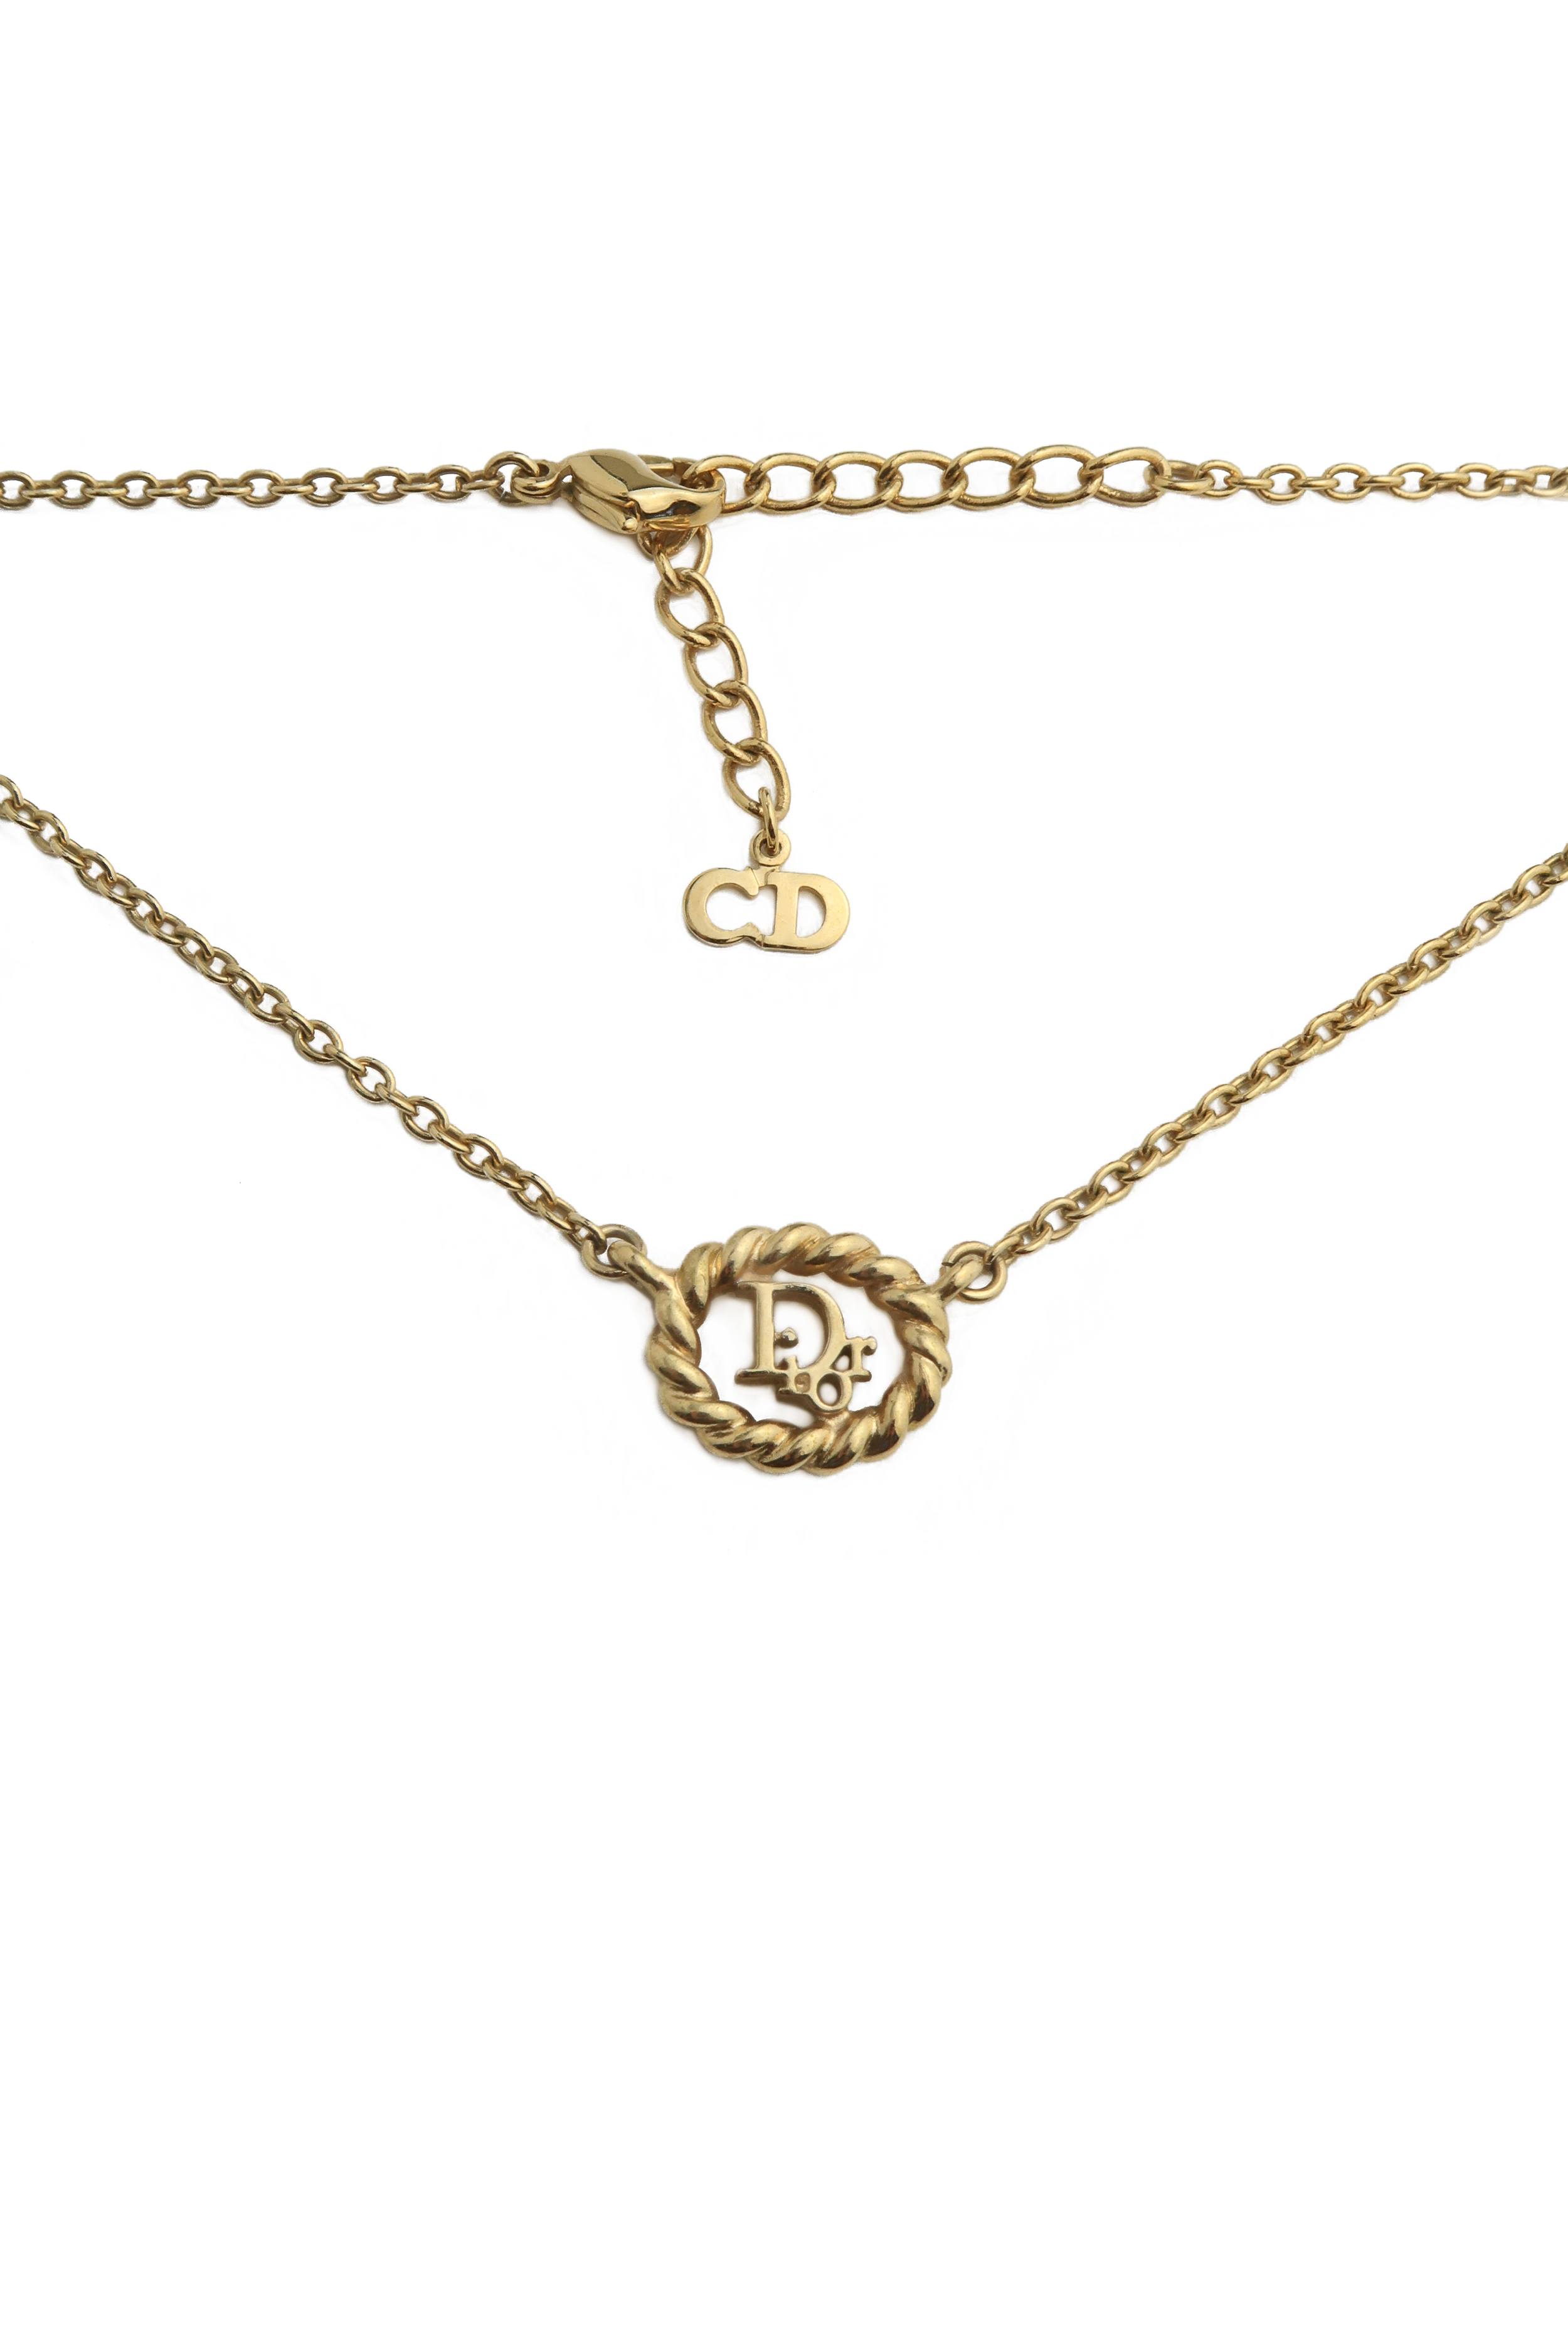 Authentic Dior Vintage Oval Crystal Logo Necklace — LUXE Reworked